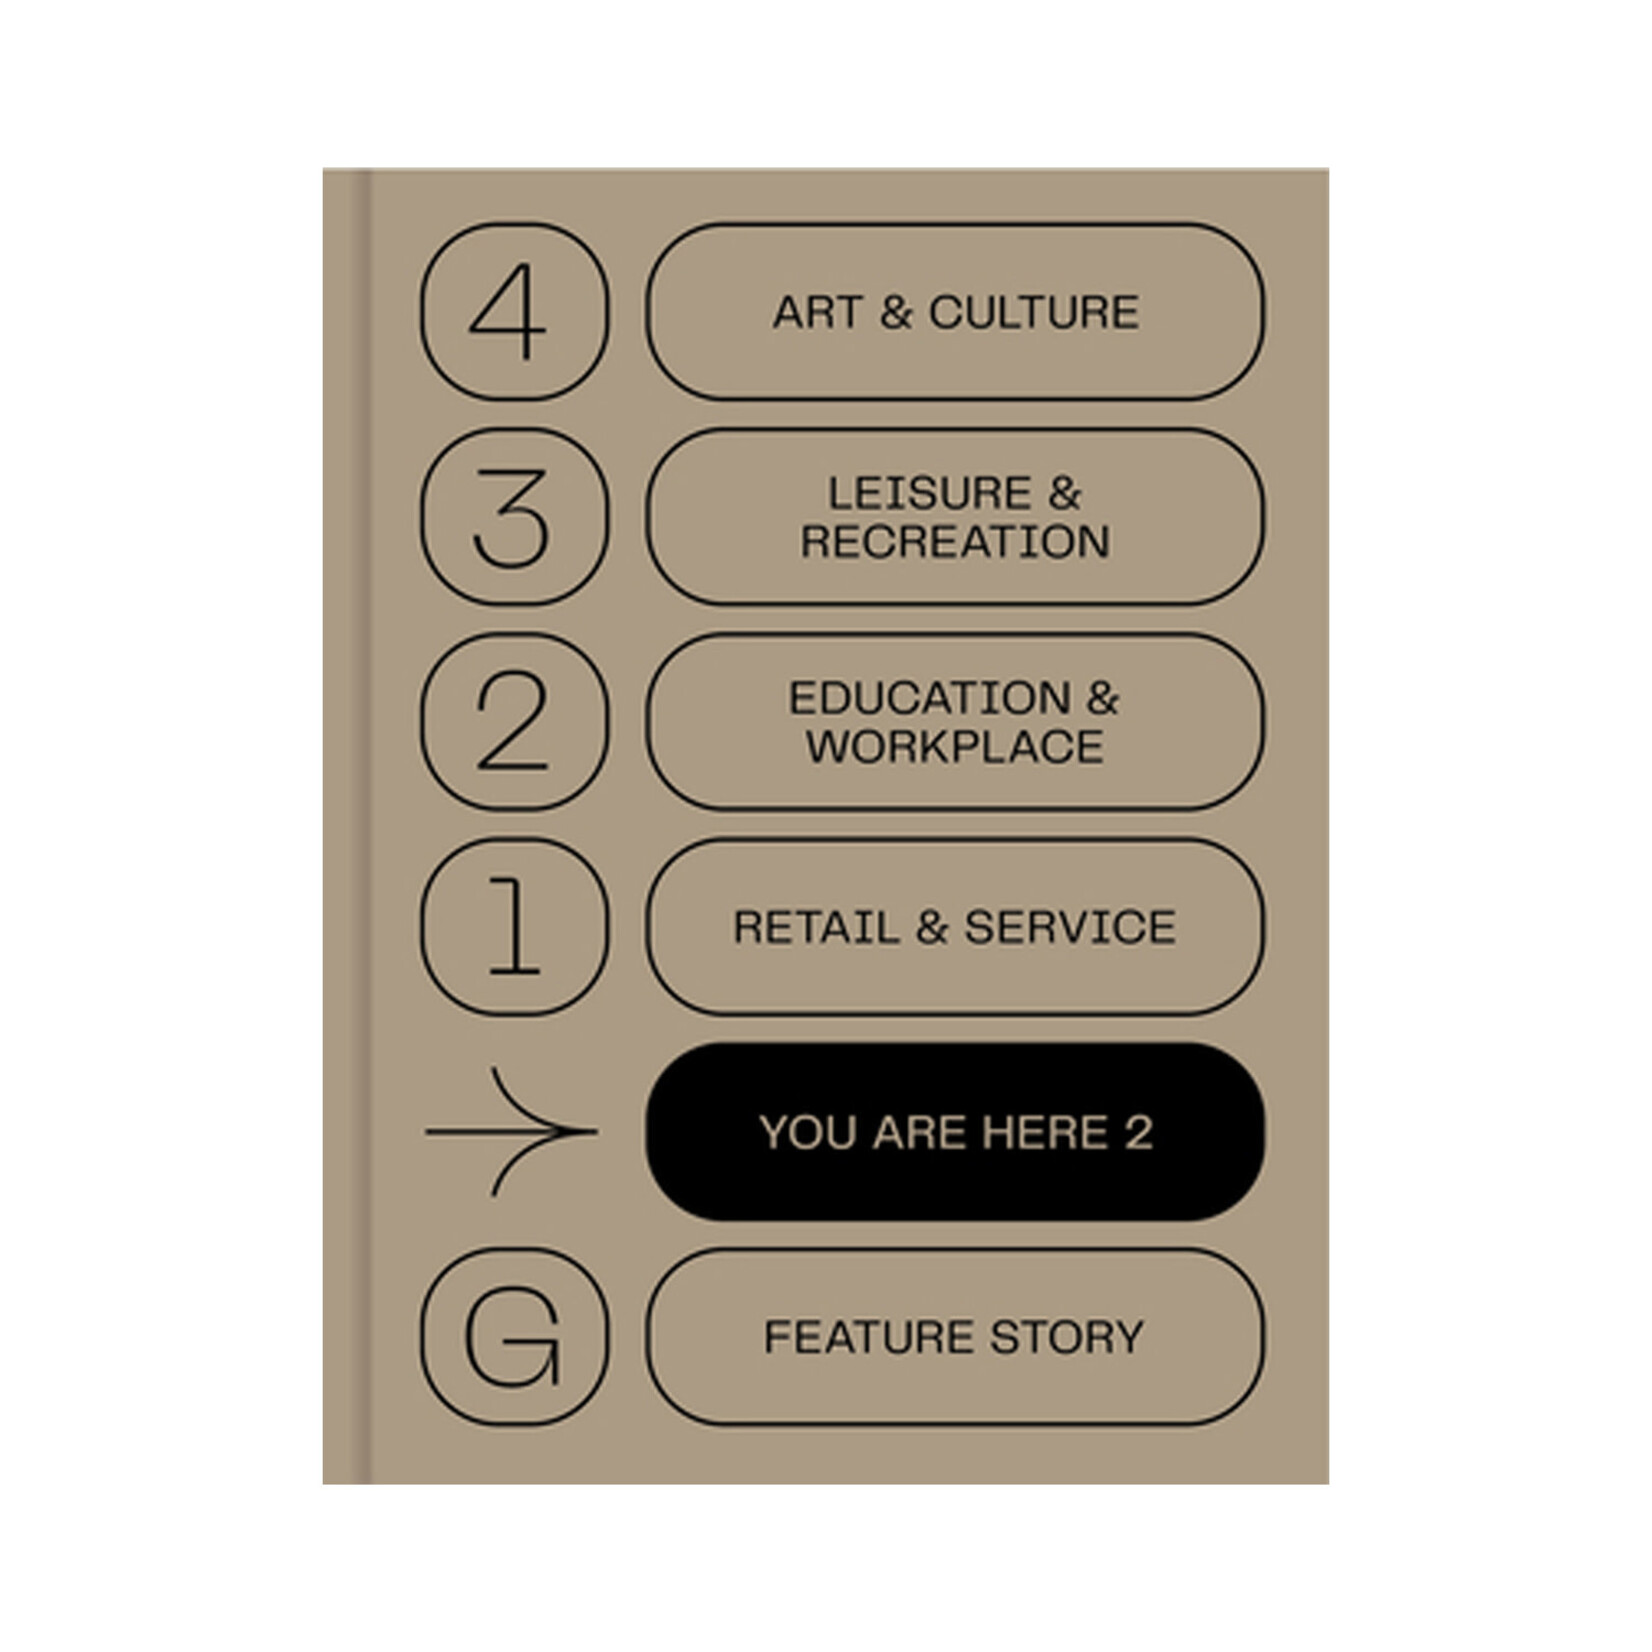 You Are Here 2: A New Approach to Signage and Wayfinding